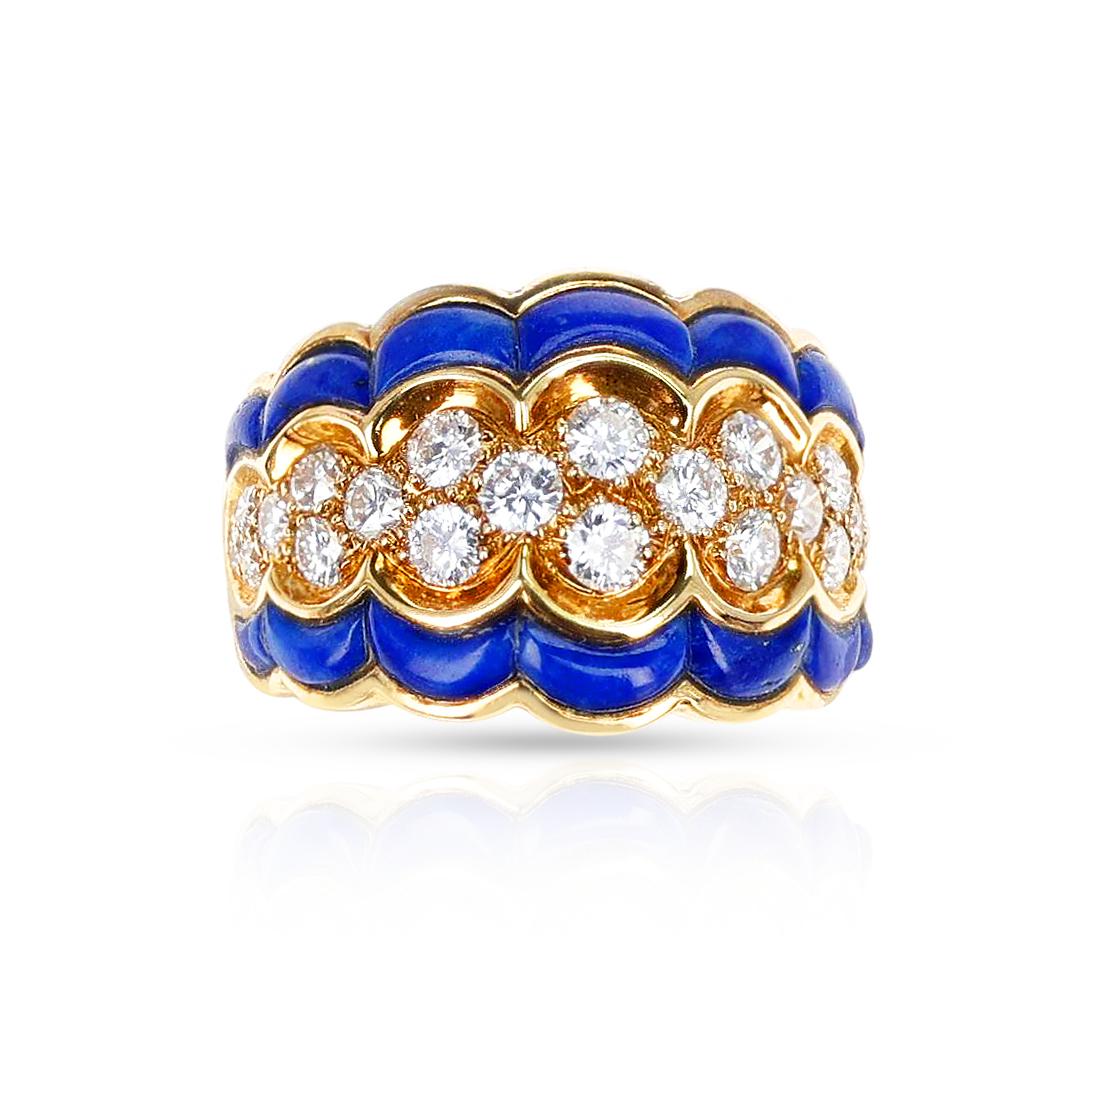 A French Van Cleef & Arpels Lapis and Diamond Ring, 18k. The total weight is 12.50 grams. The ring size is 6.50 US.

SKU 1139